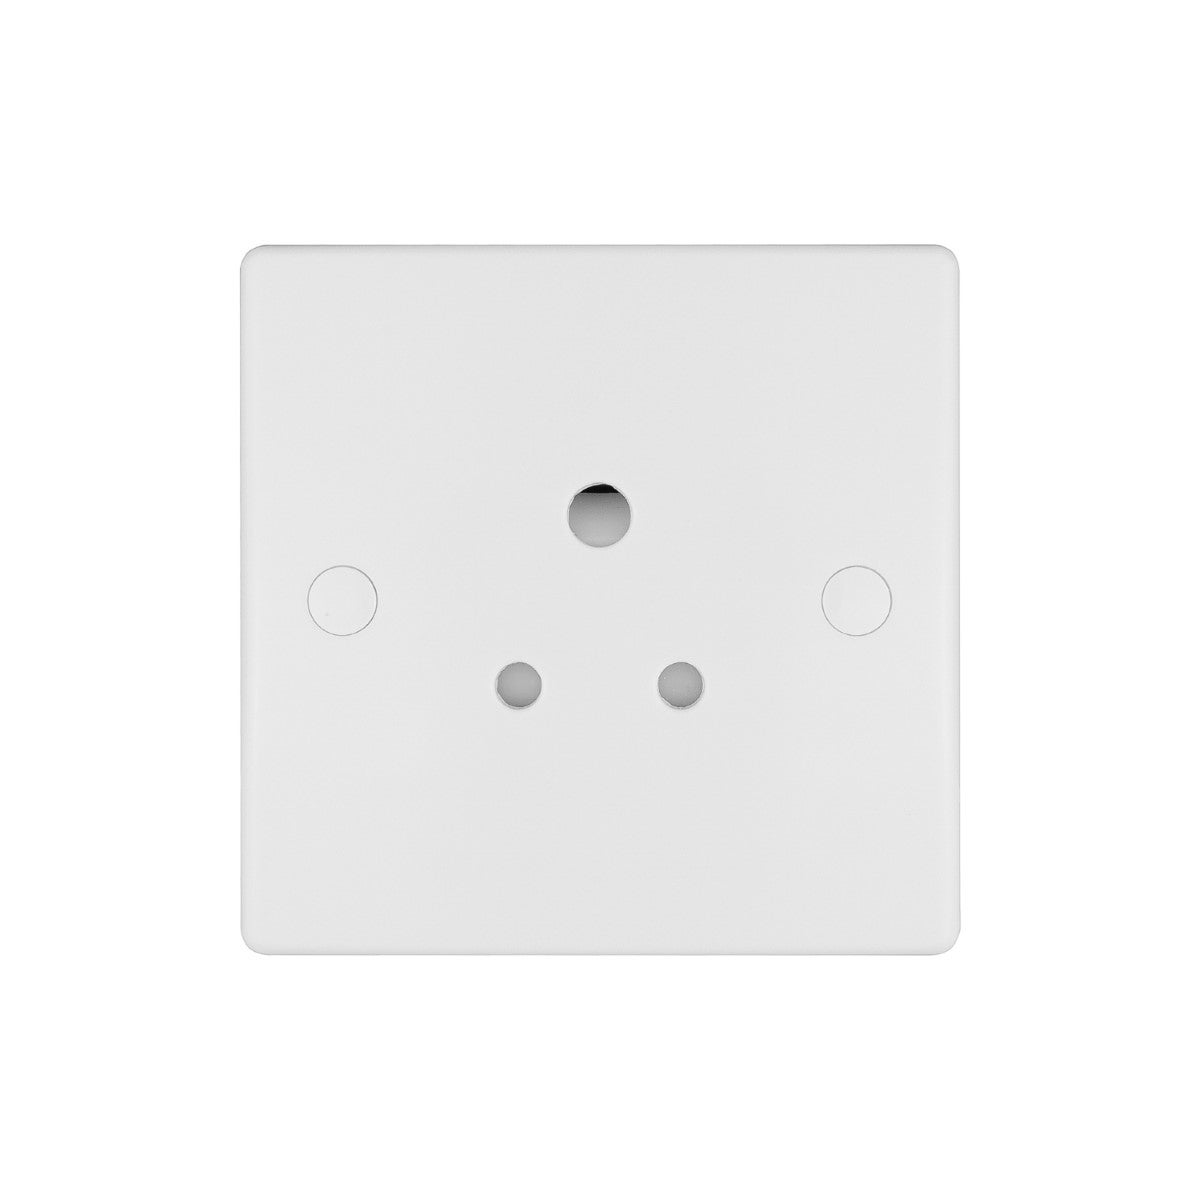 Ultimate Slimline - unswitched socket - 1 gang - white